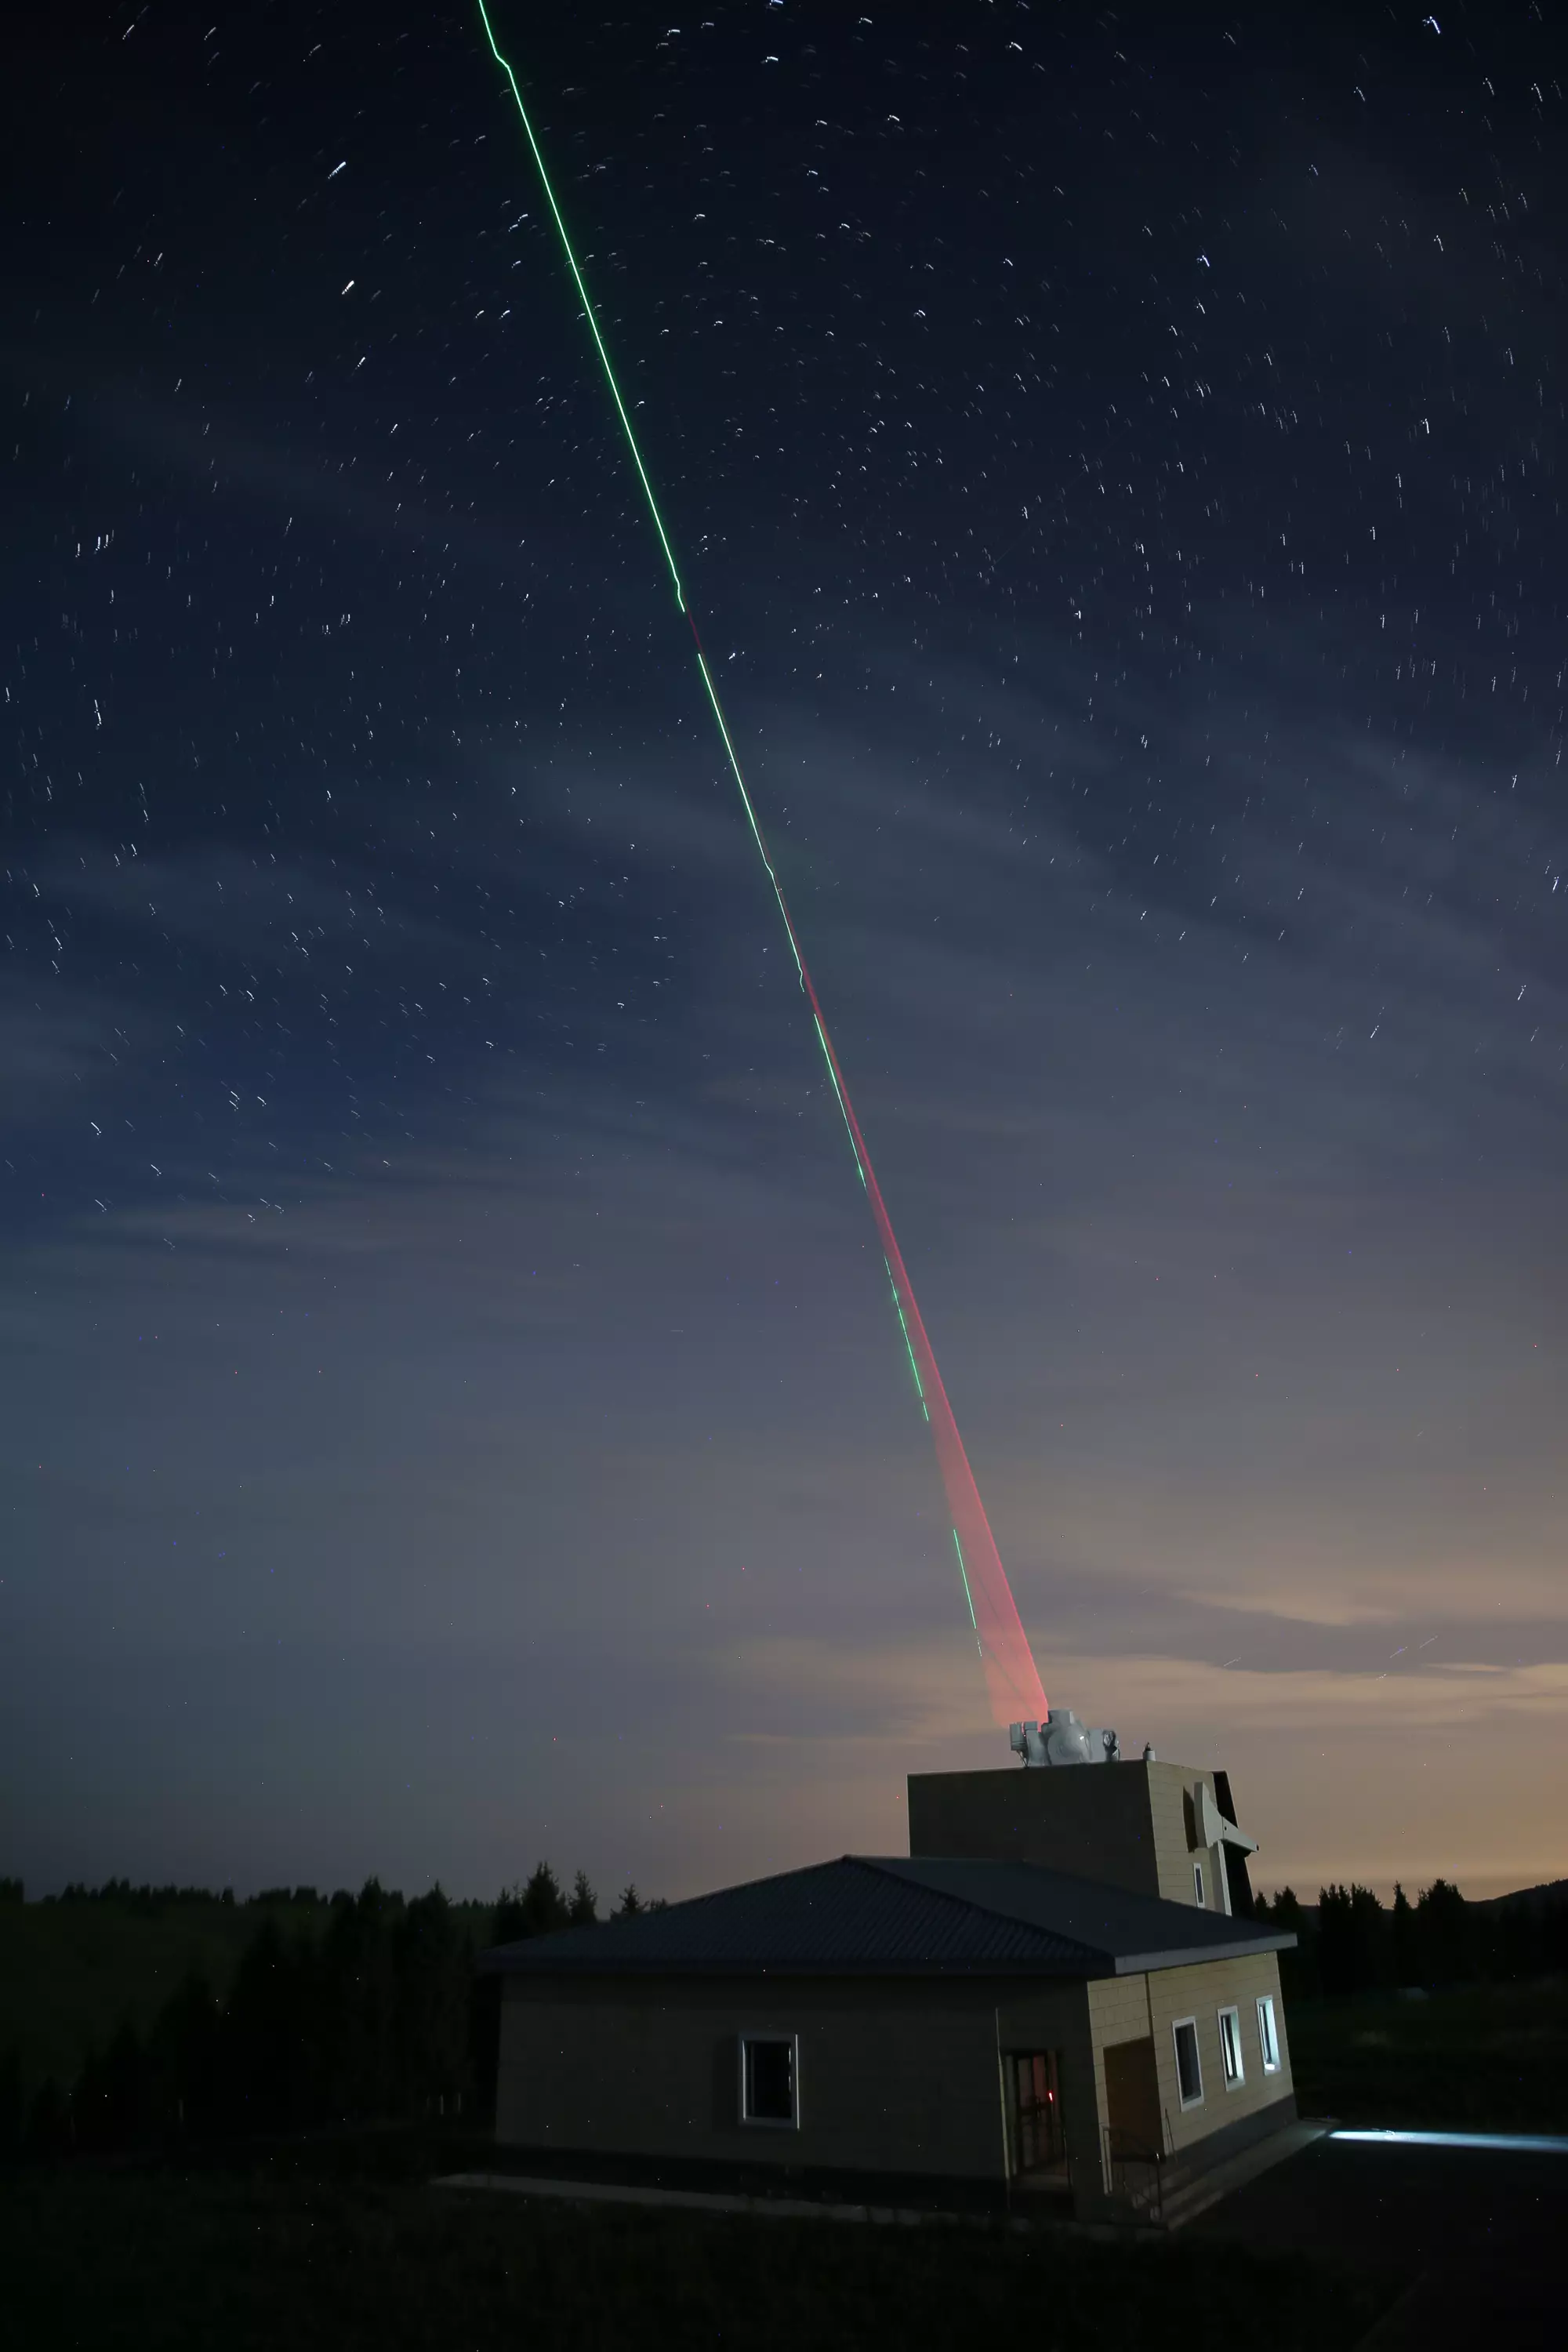 Photons being transmitted to space